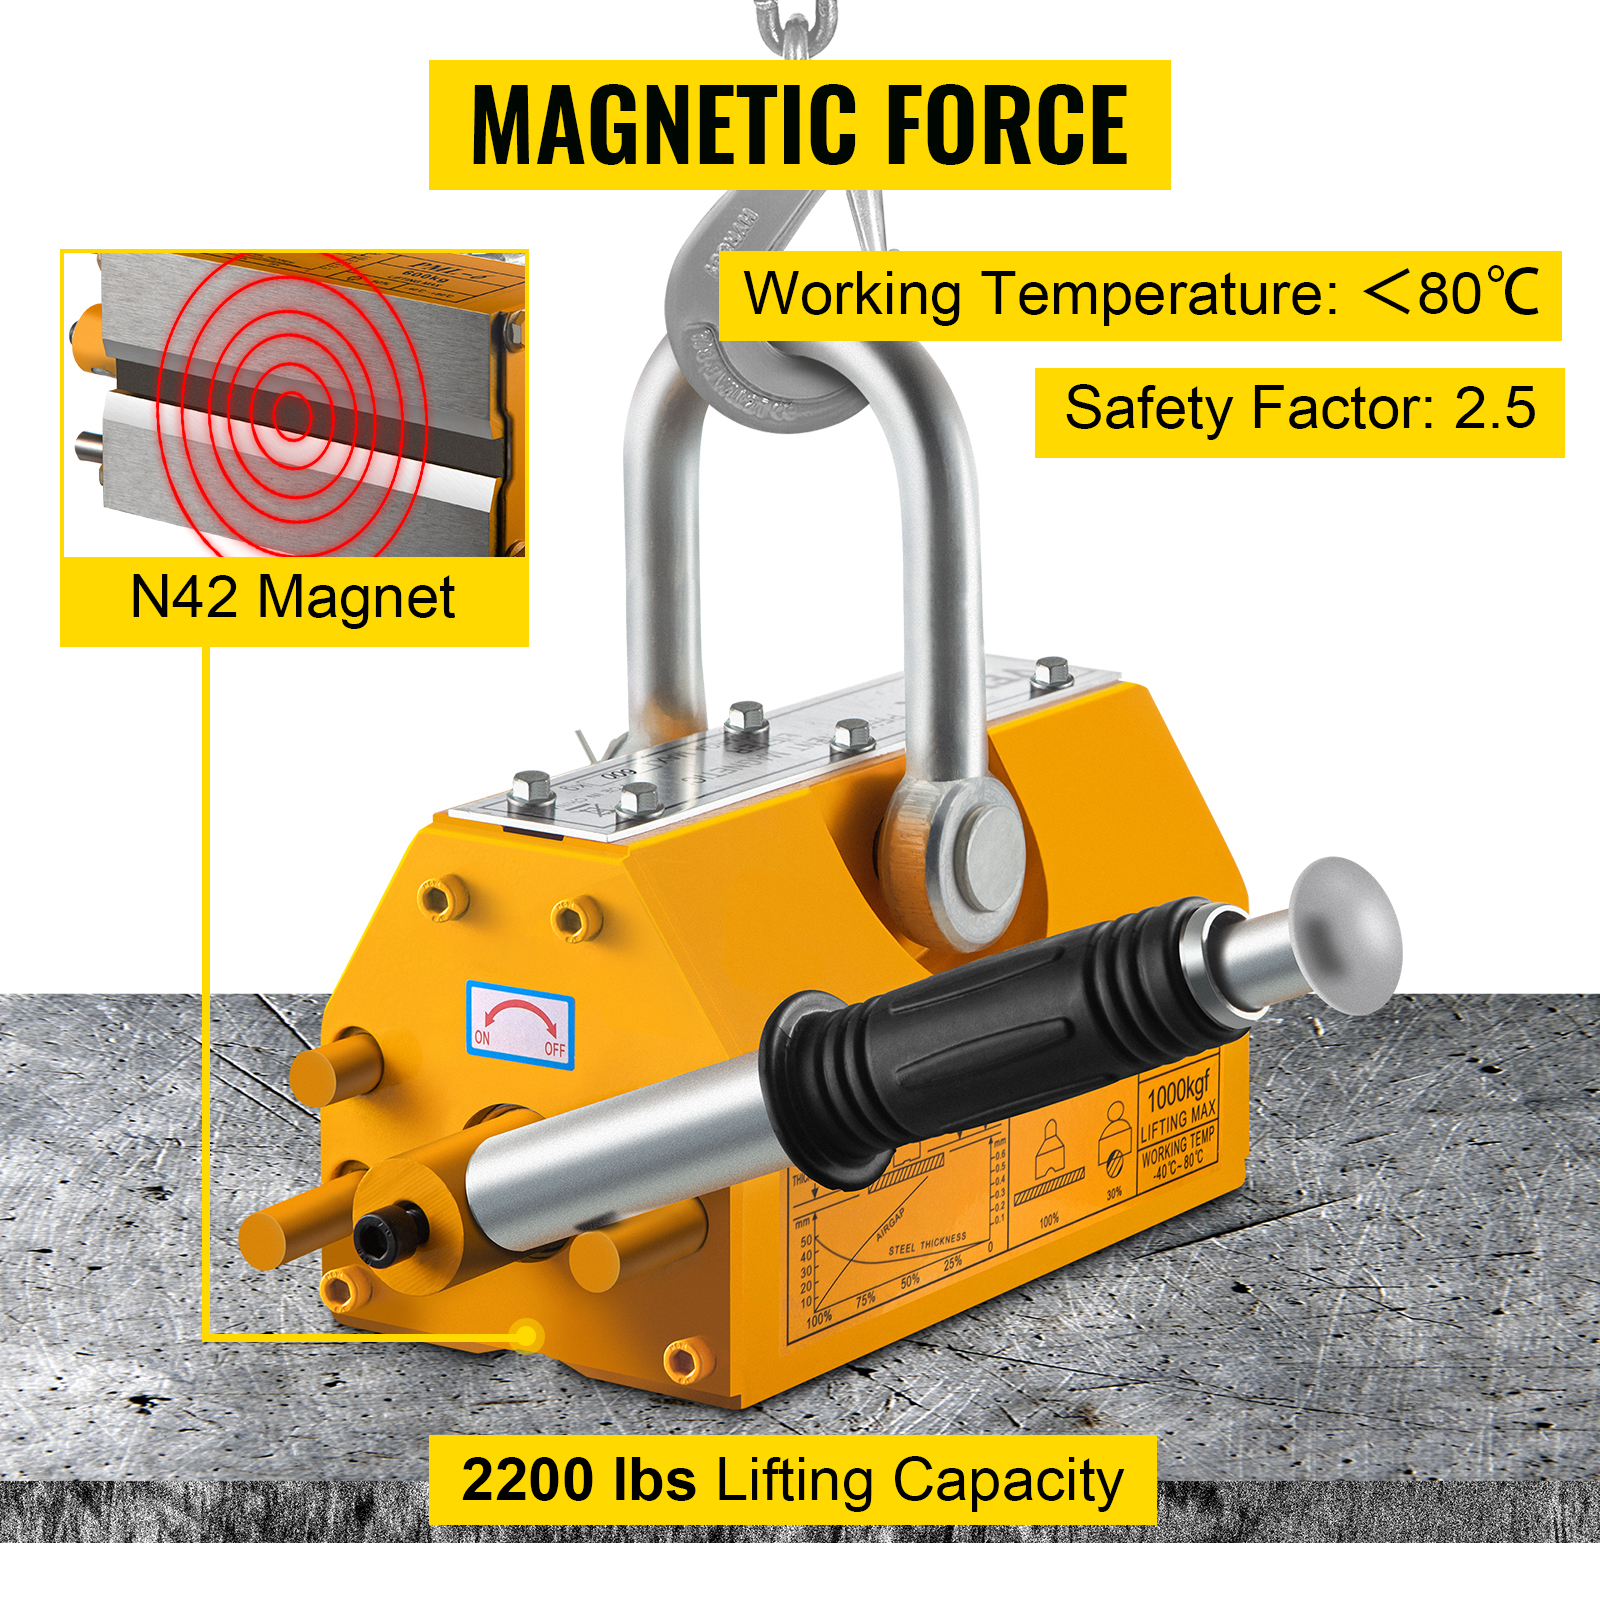 VEVOR Magnetic Lifter 1000KG Hoist Magnet Neodymium Iron Permanent Magnet Crane and Cylinders Heavy Duty for Lifting Steel Sheets 2200LBS Capability Upgraded Lifting Magnet Blocks Plates